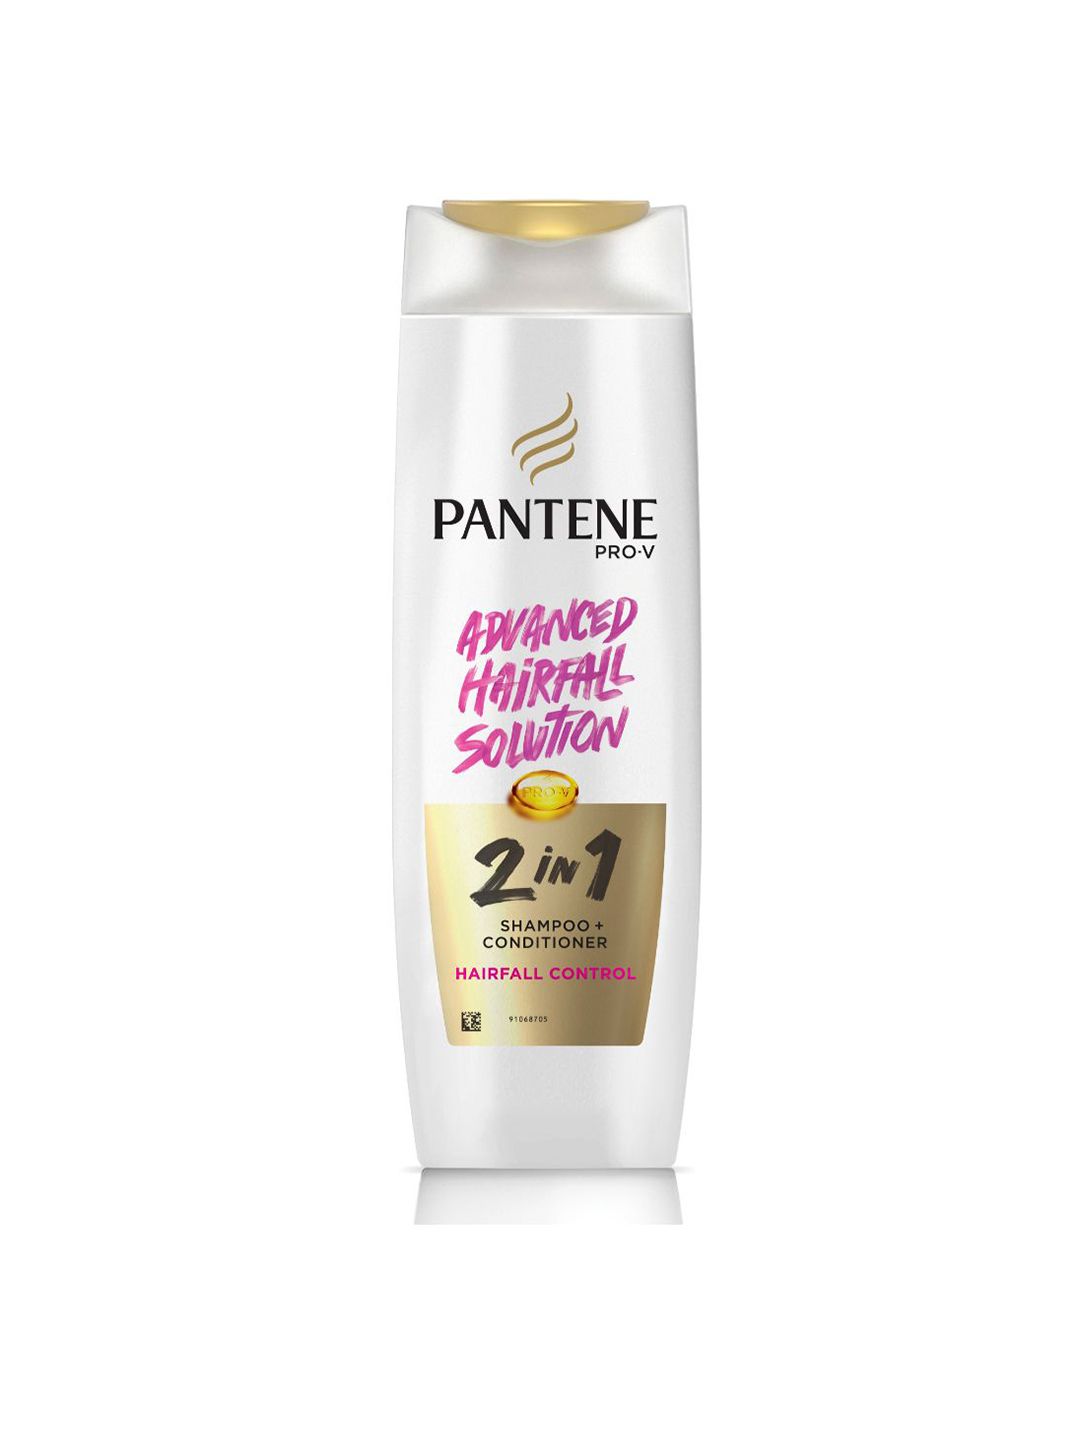 Pantene 2 In 1 Hairfall Control Shampoo + Conditioner, 340 ml Price in India